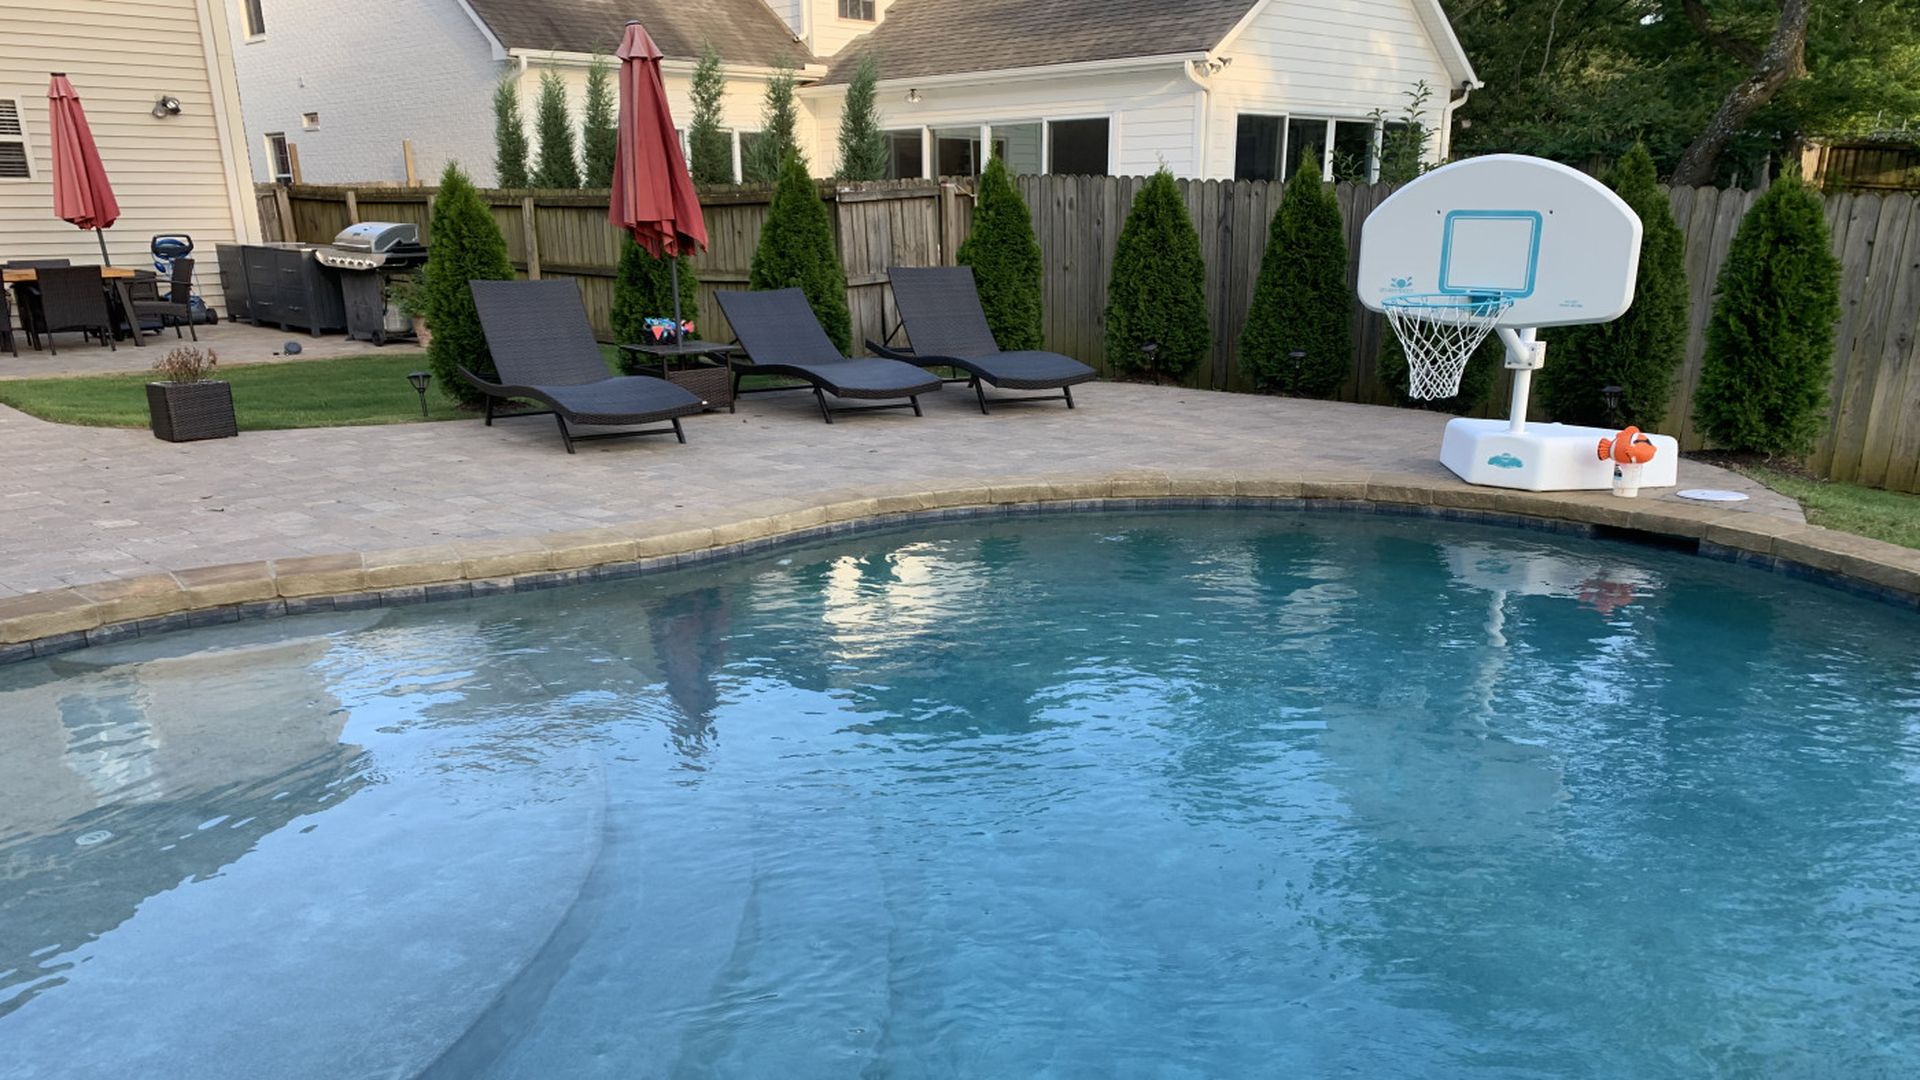 Swimply - Rent Private Pools, Courts, and More by the Hour - Pools Near Me